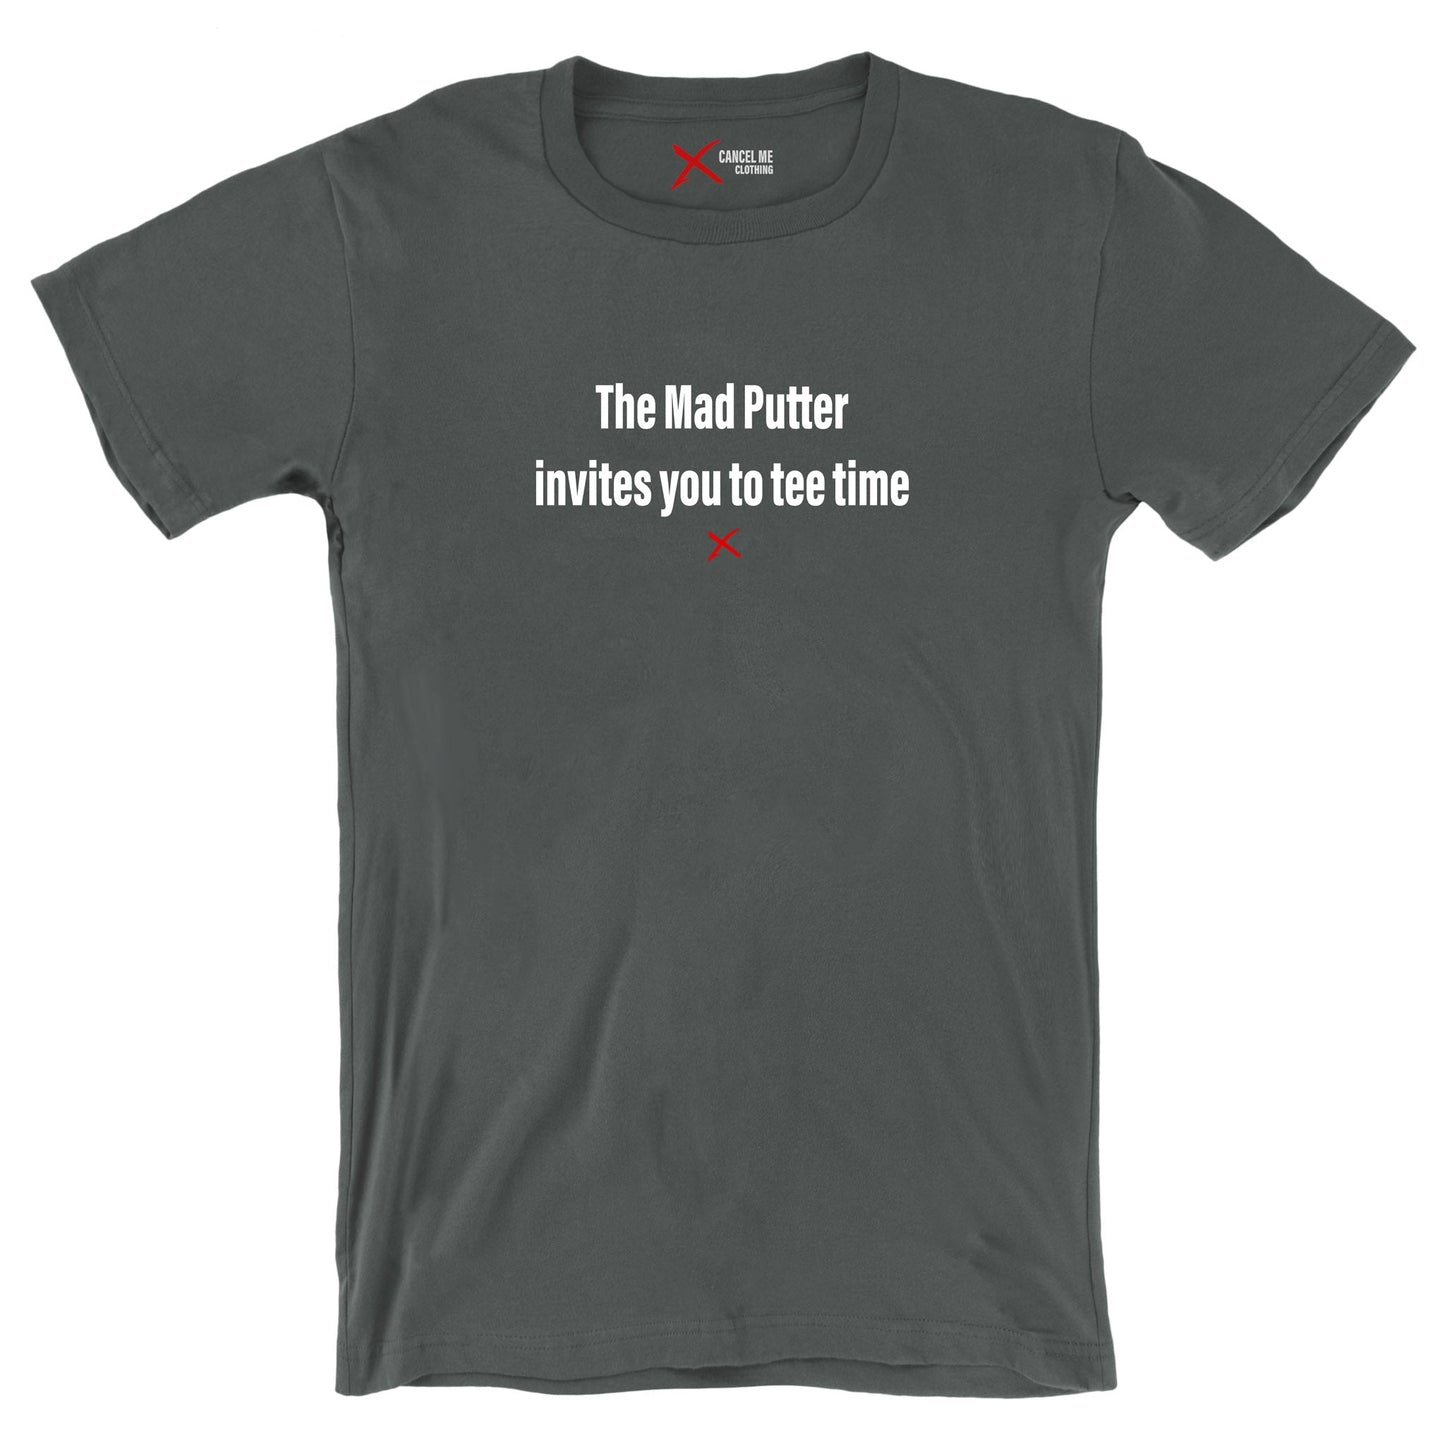 The Mad Putter invites you to tee time - Shirt